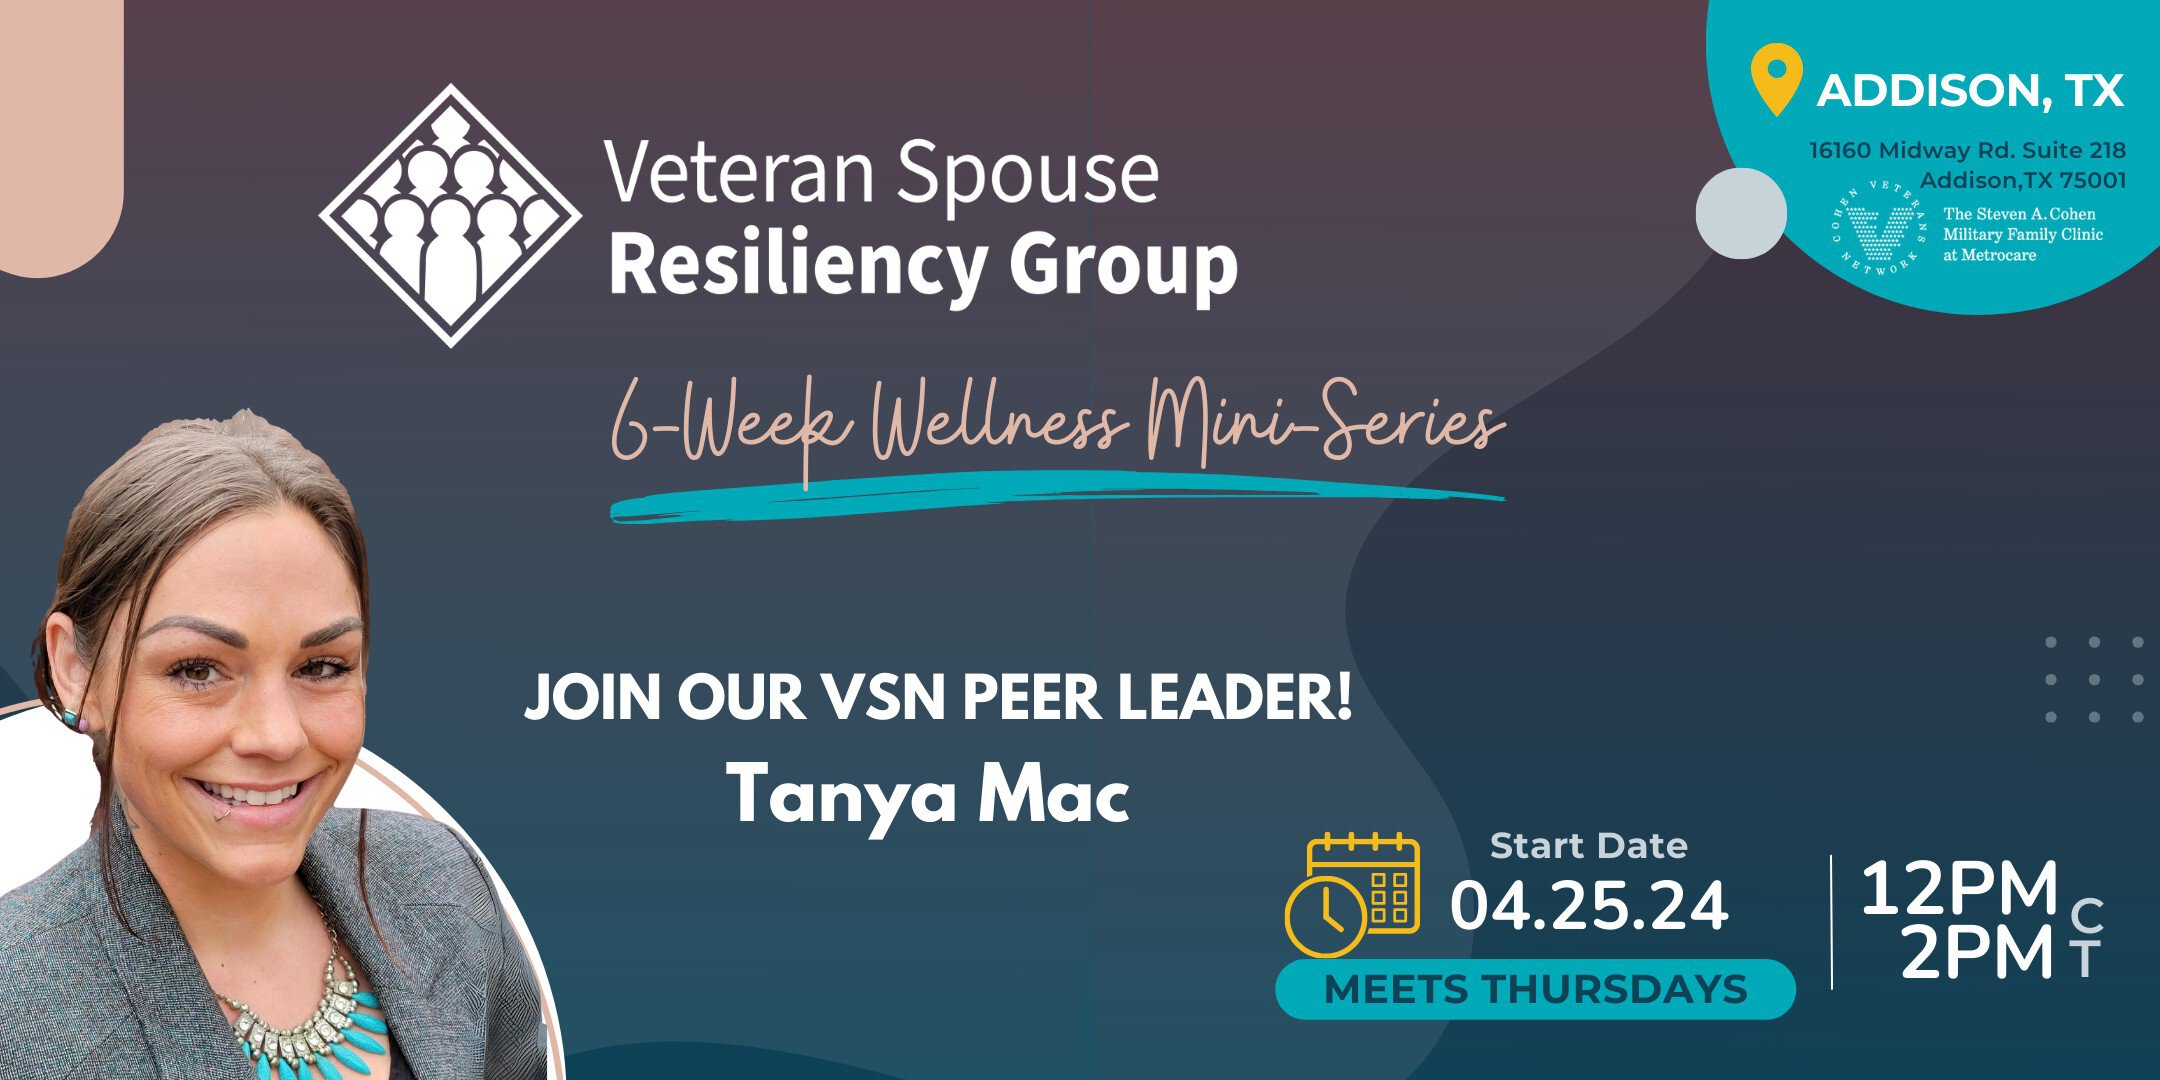 VSRG Wellness Mini Series starting 04.25.24 from 12 pm to 2 pm CT